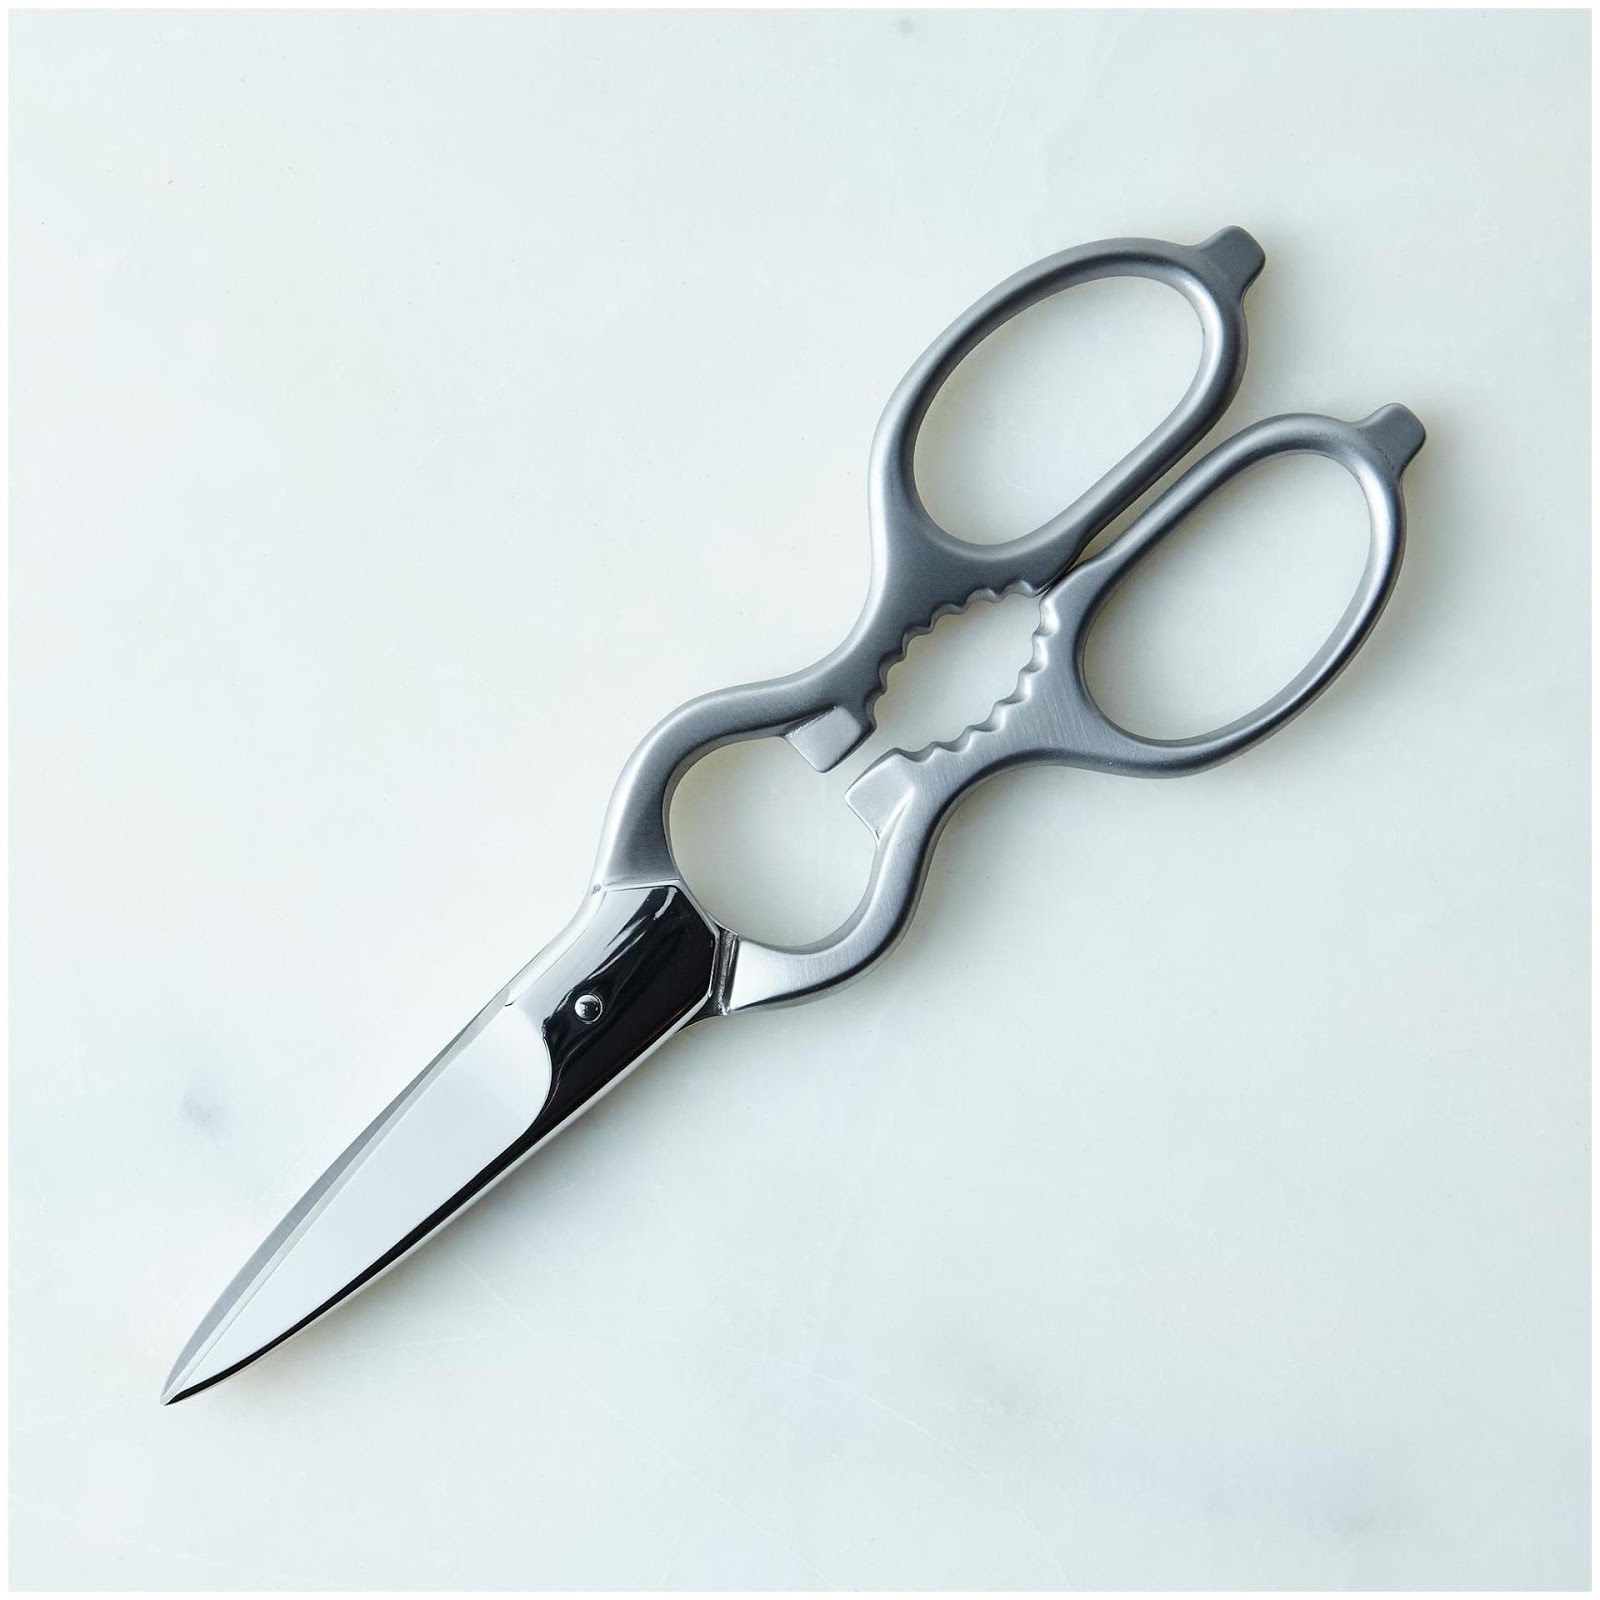 20 I Cut My Hair With Rusty Kitchen Scissors To Be Efficient in the Kitchen Use Scissors I,Cut,My,Hair,Rusty,Kitchen,Scissors